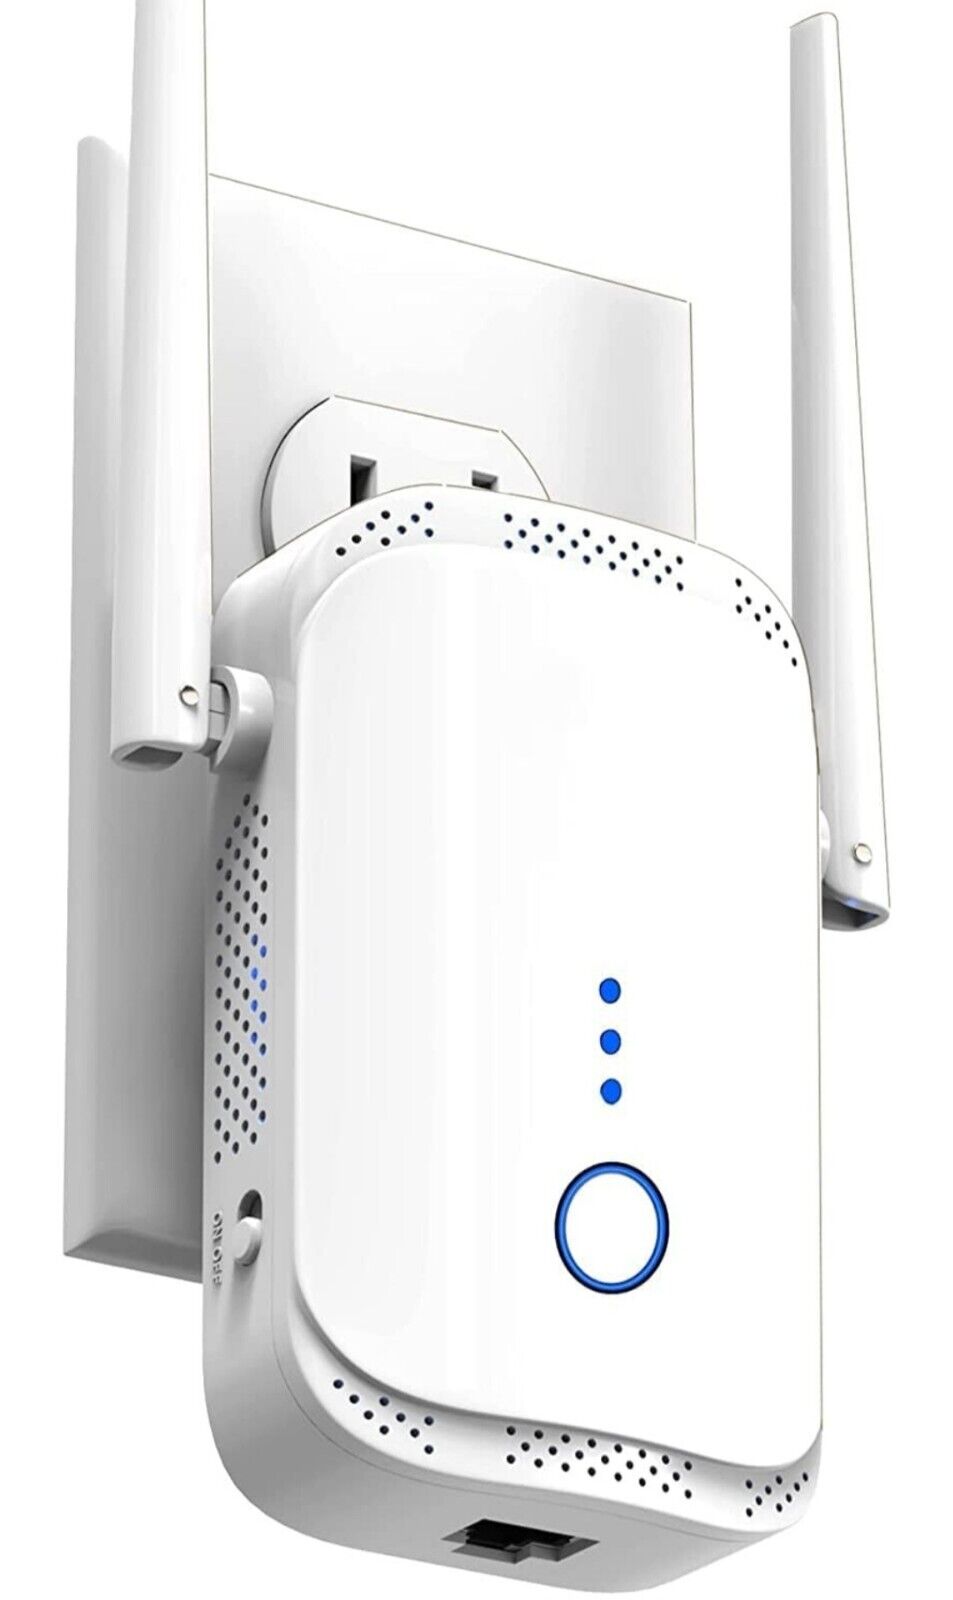 Macard Fastest WiFi Extender/Booster | Latest Release Up to 74% Faster